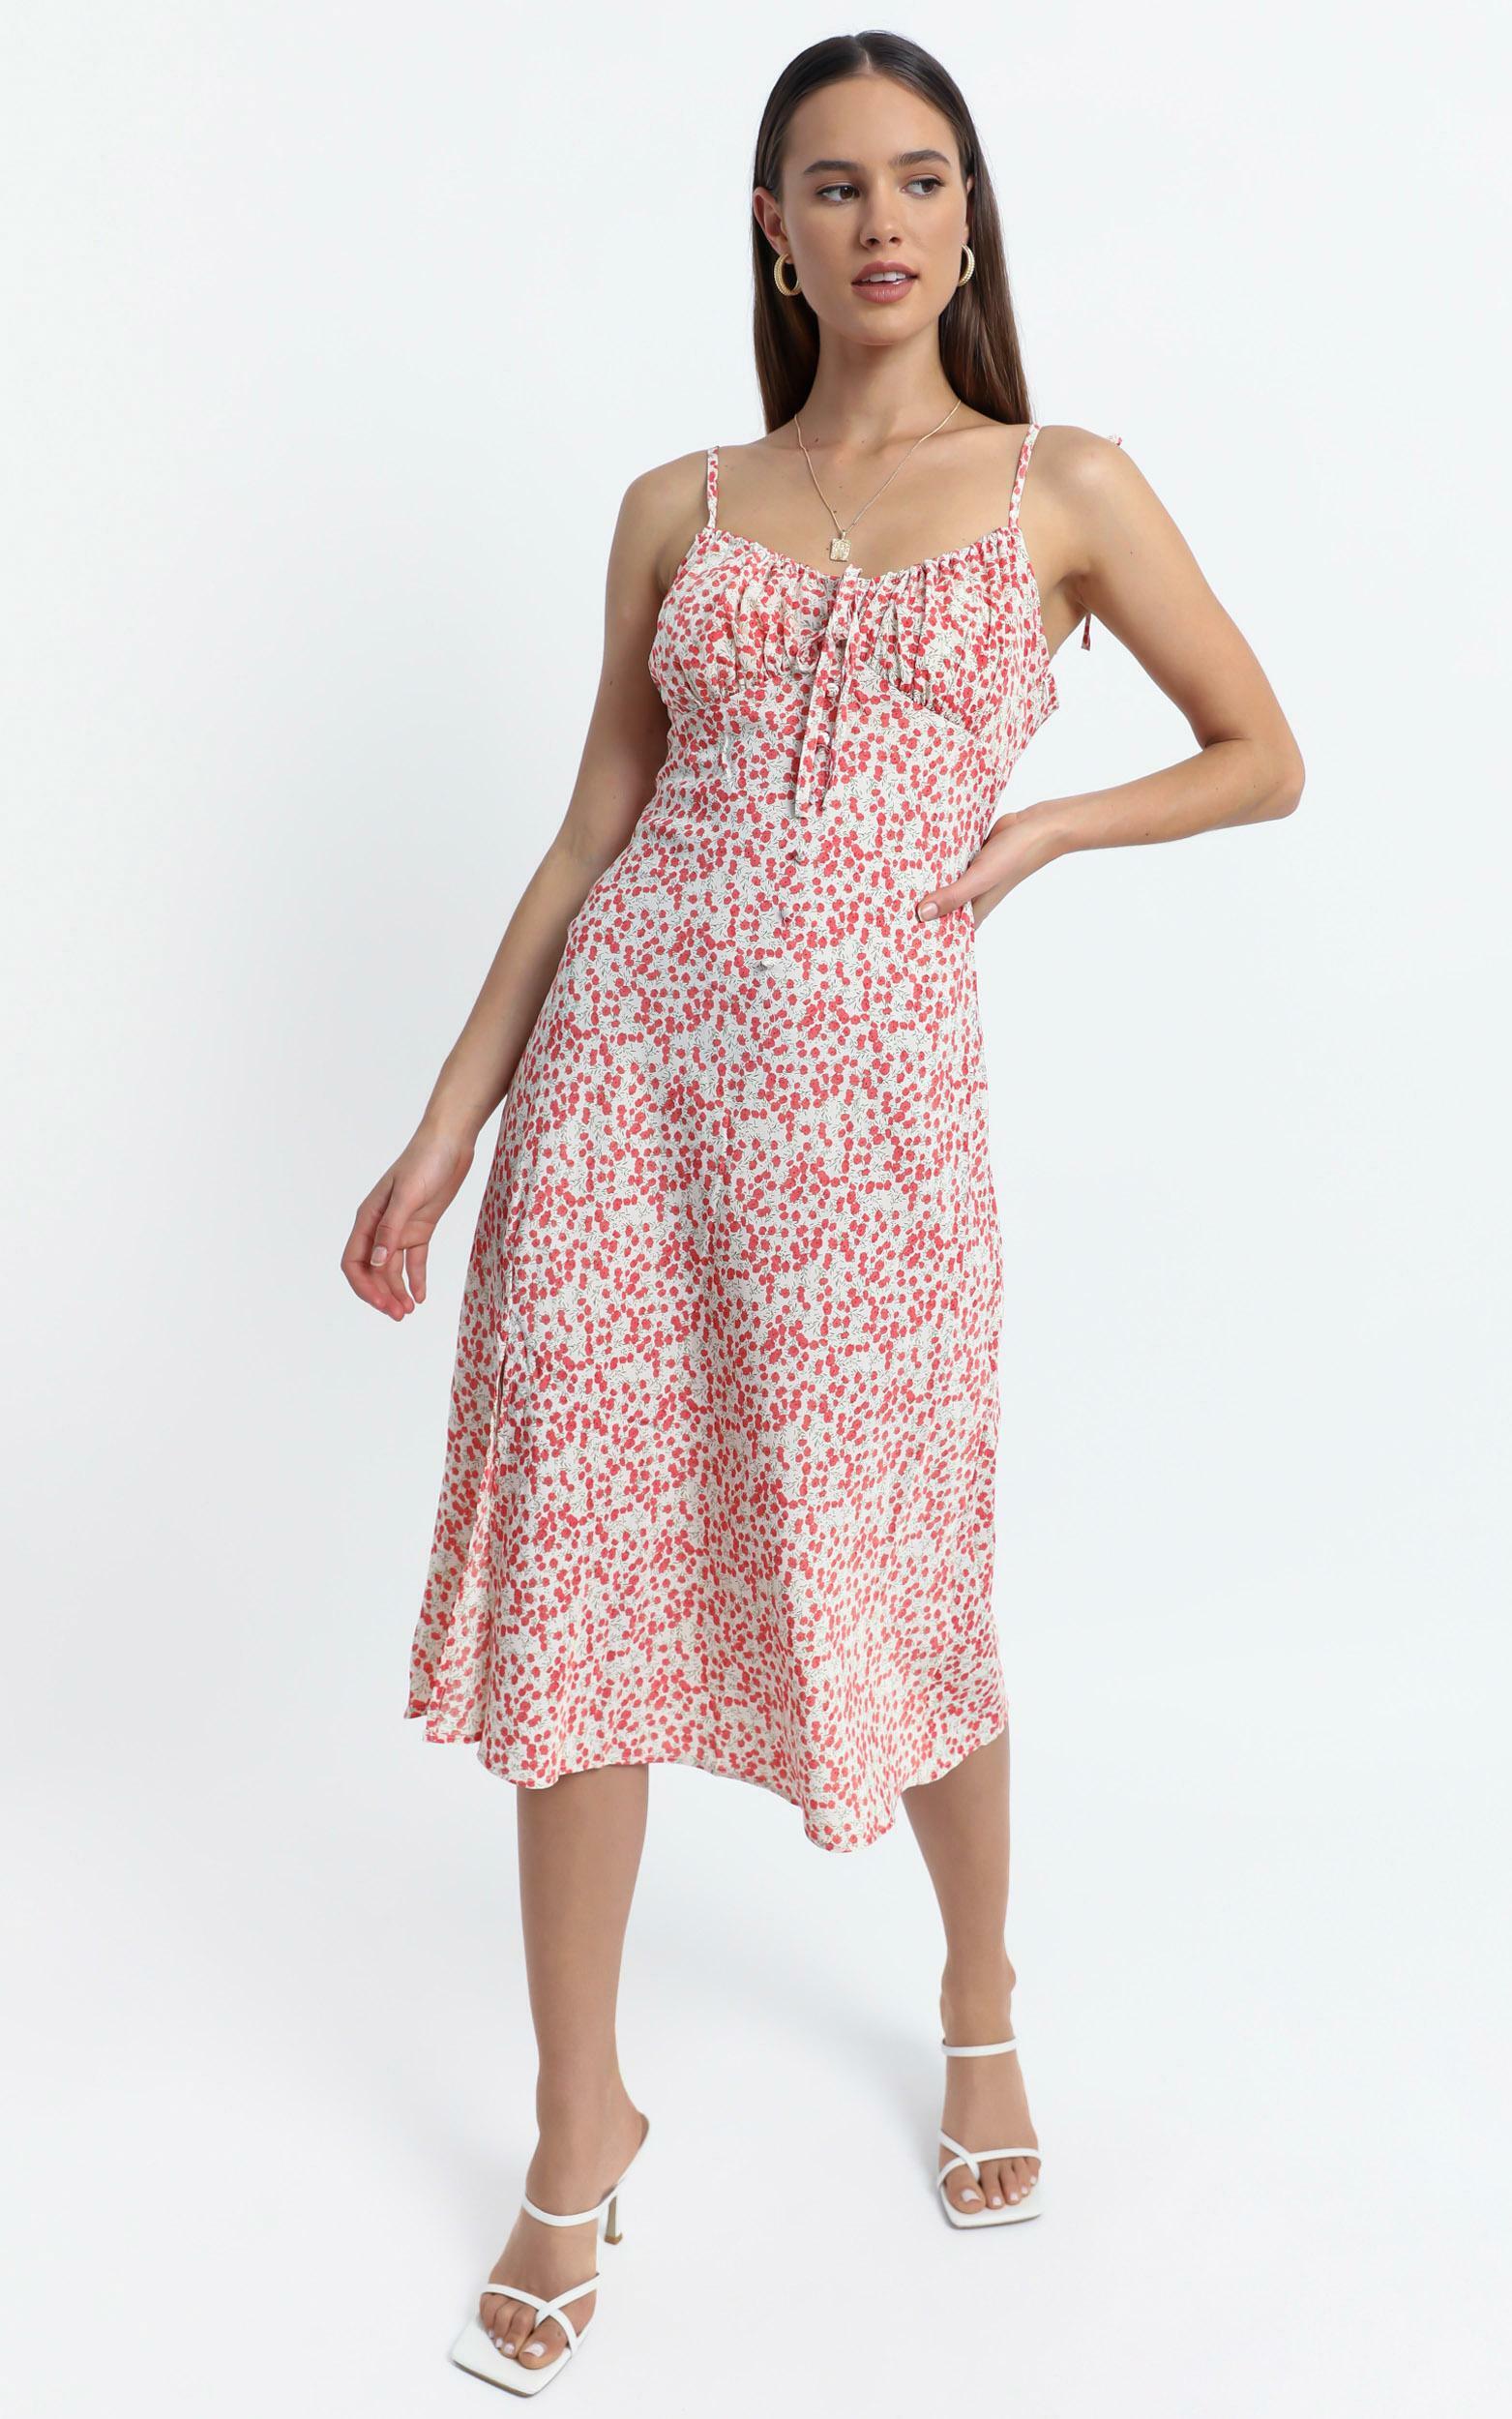 California Dress in Red Floral - 10, RED1, hi-res image number null